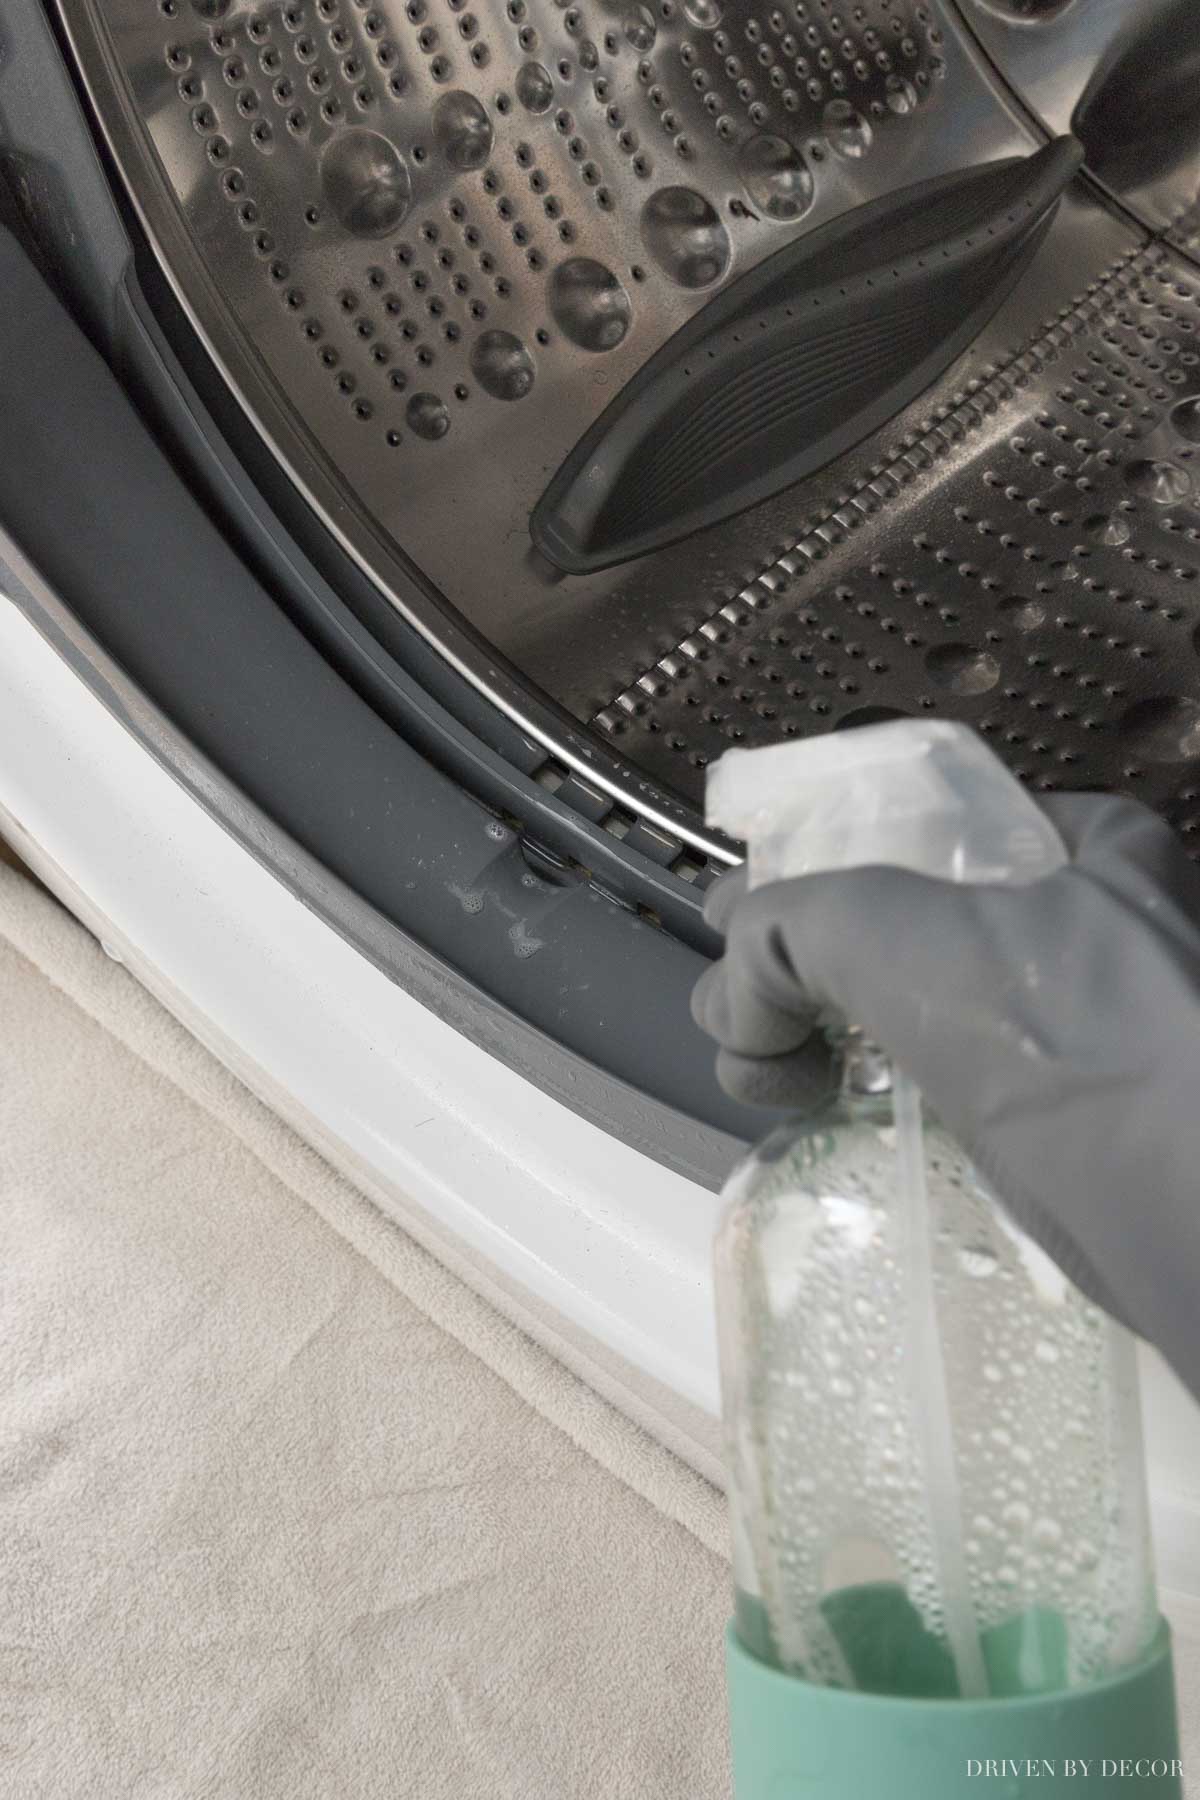 Spraying diluted bleach on your washing machine seal before scrubbing it is the best way I found to get it clean!